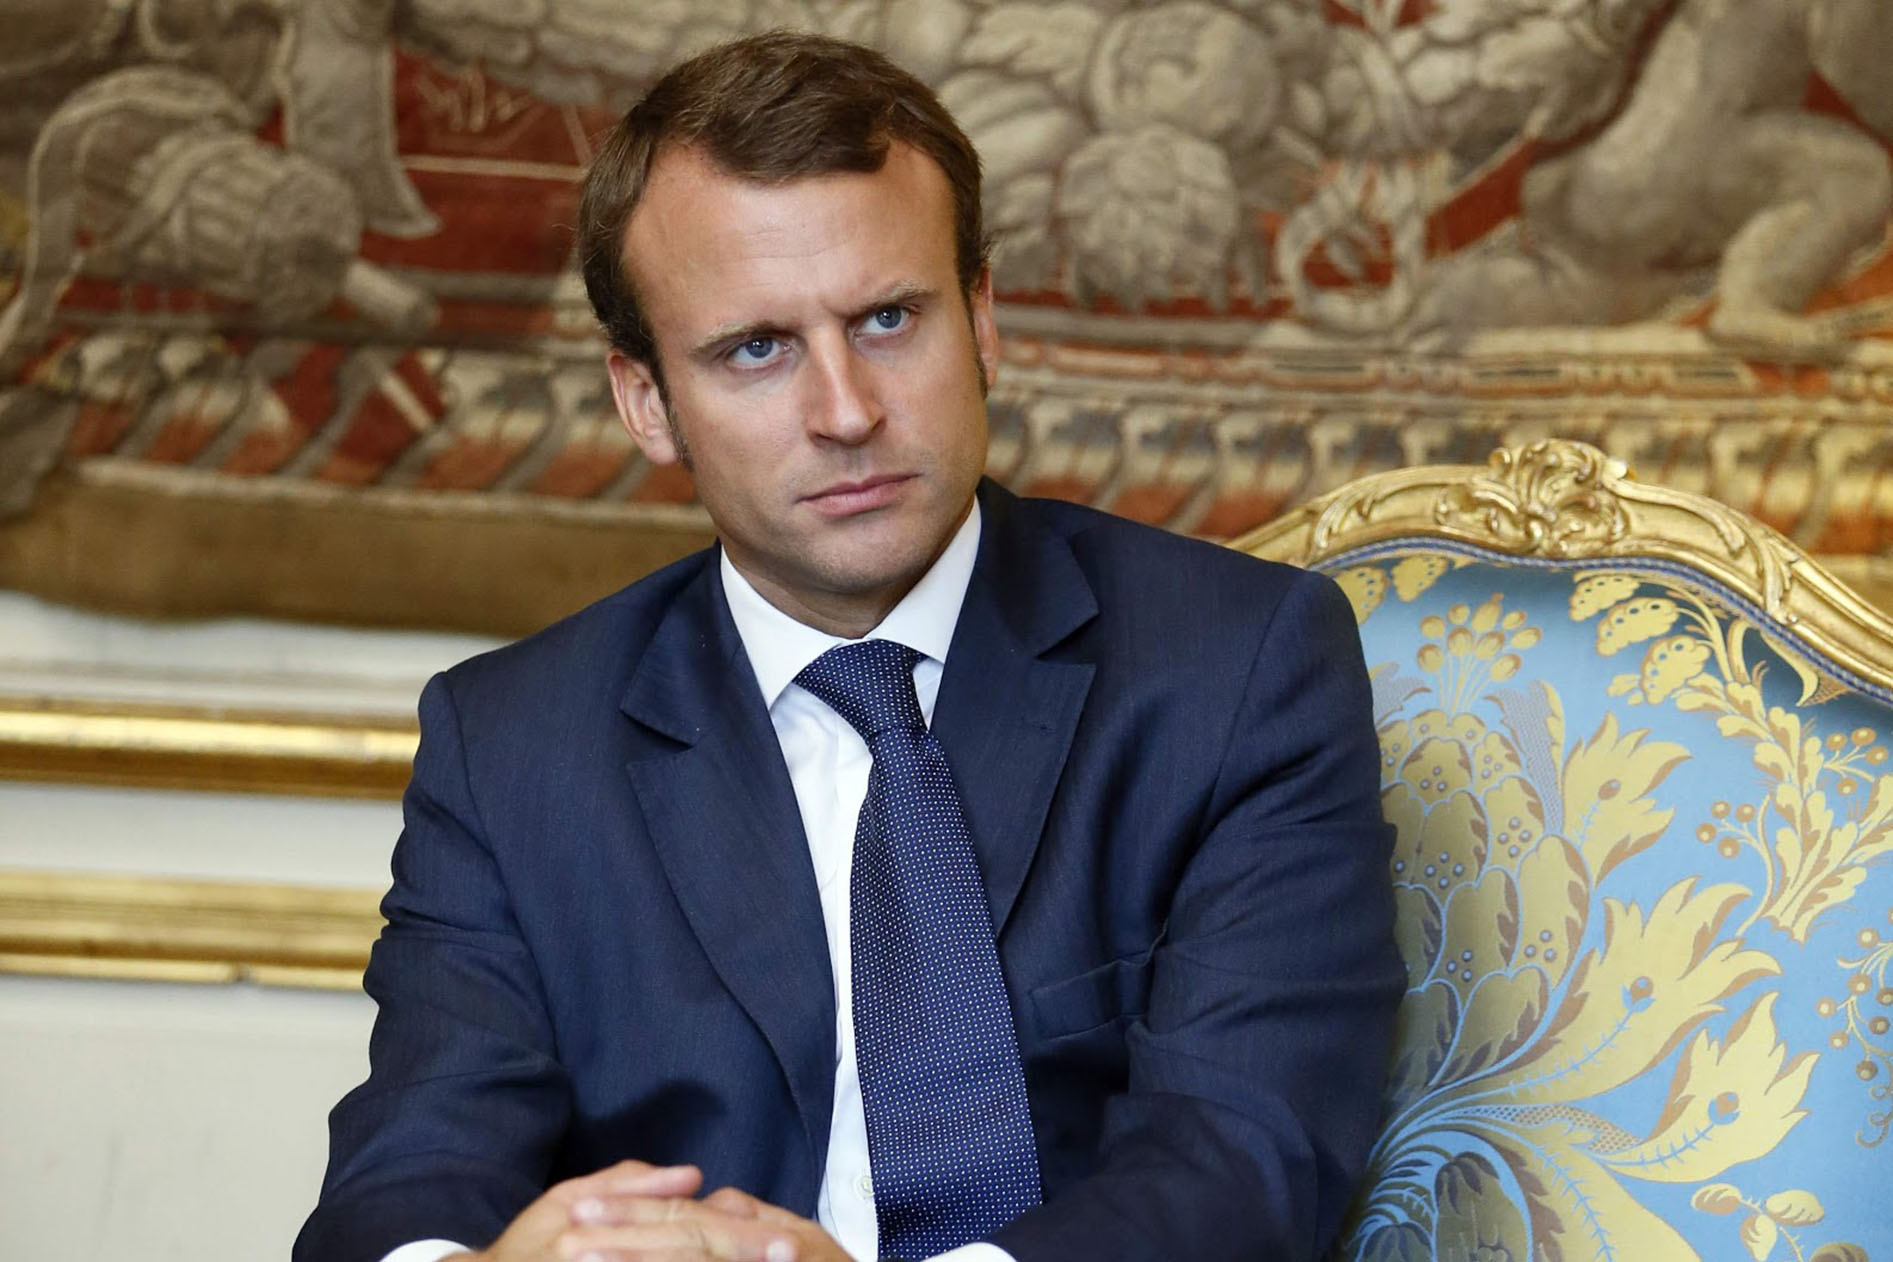 French Economy minister Emmanuel Macron attends a meeting on energy housing renovation following the presentation of the "34 plans for the new industrial France" at the Elysee Palace in Paris September 9, 2014.  REUTERS/Patrick Kovarik/Pool  (FRANCE - Tags: POLITICS)